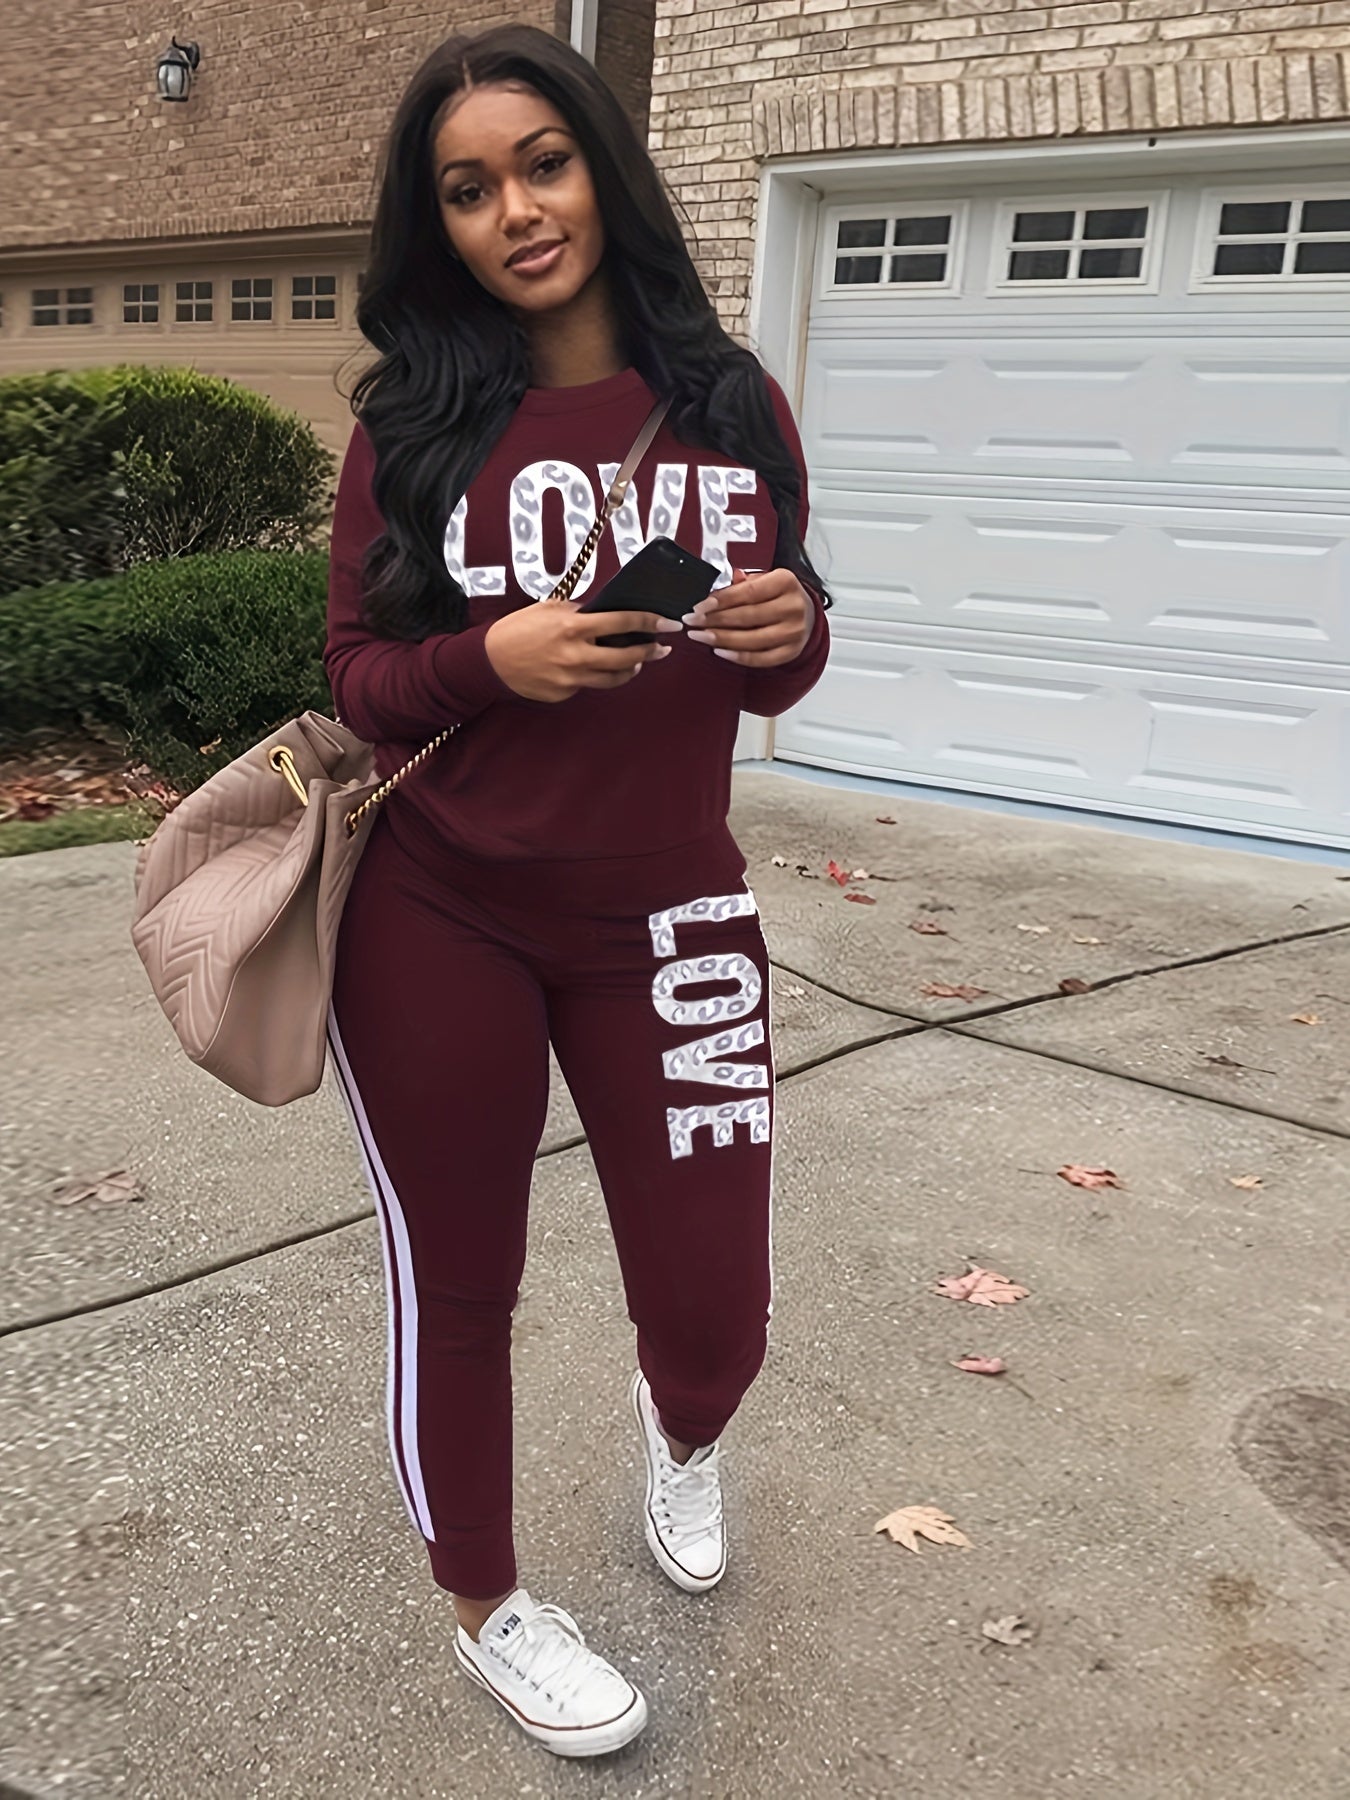 Women's Sports Two-piece Set, Love Letter Print Long Sleeve Top & Pants For Fall & Winter, Women's Clothing